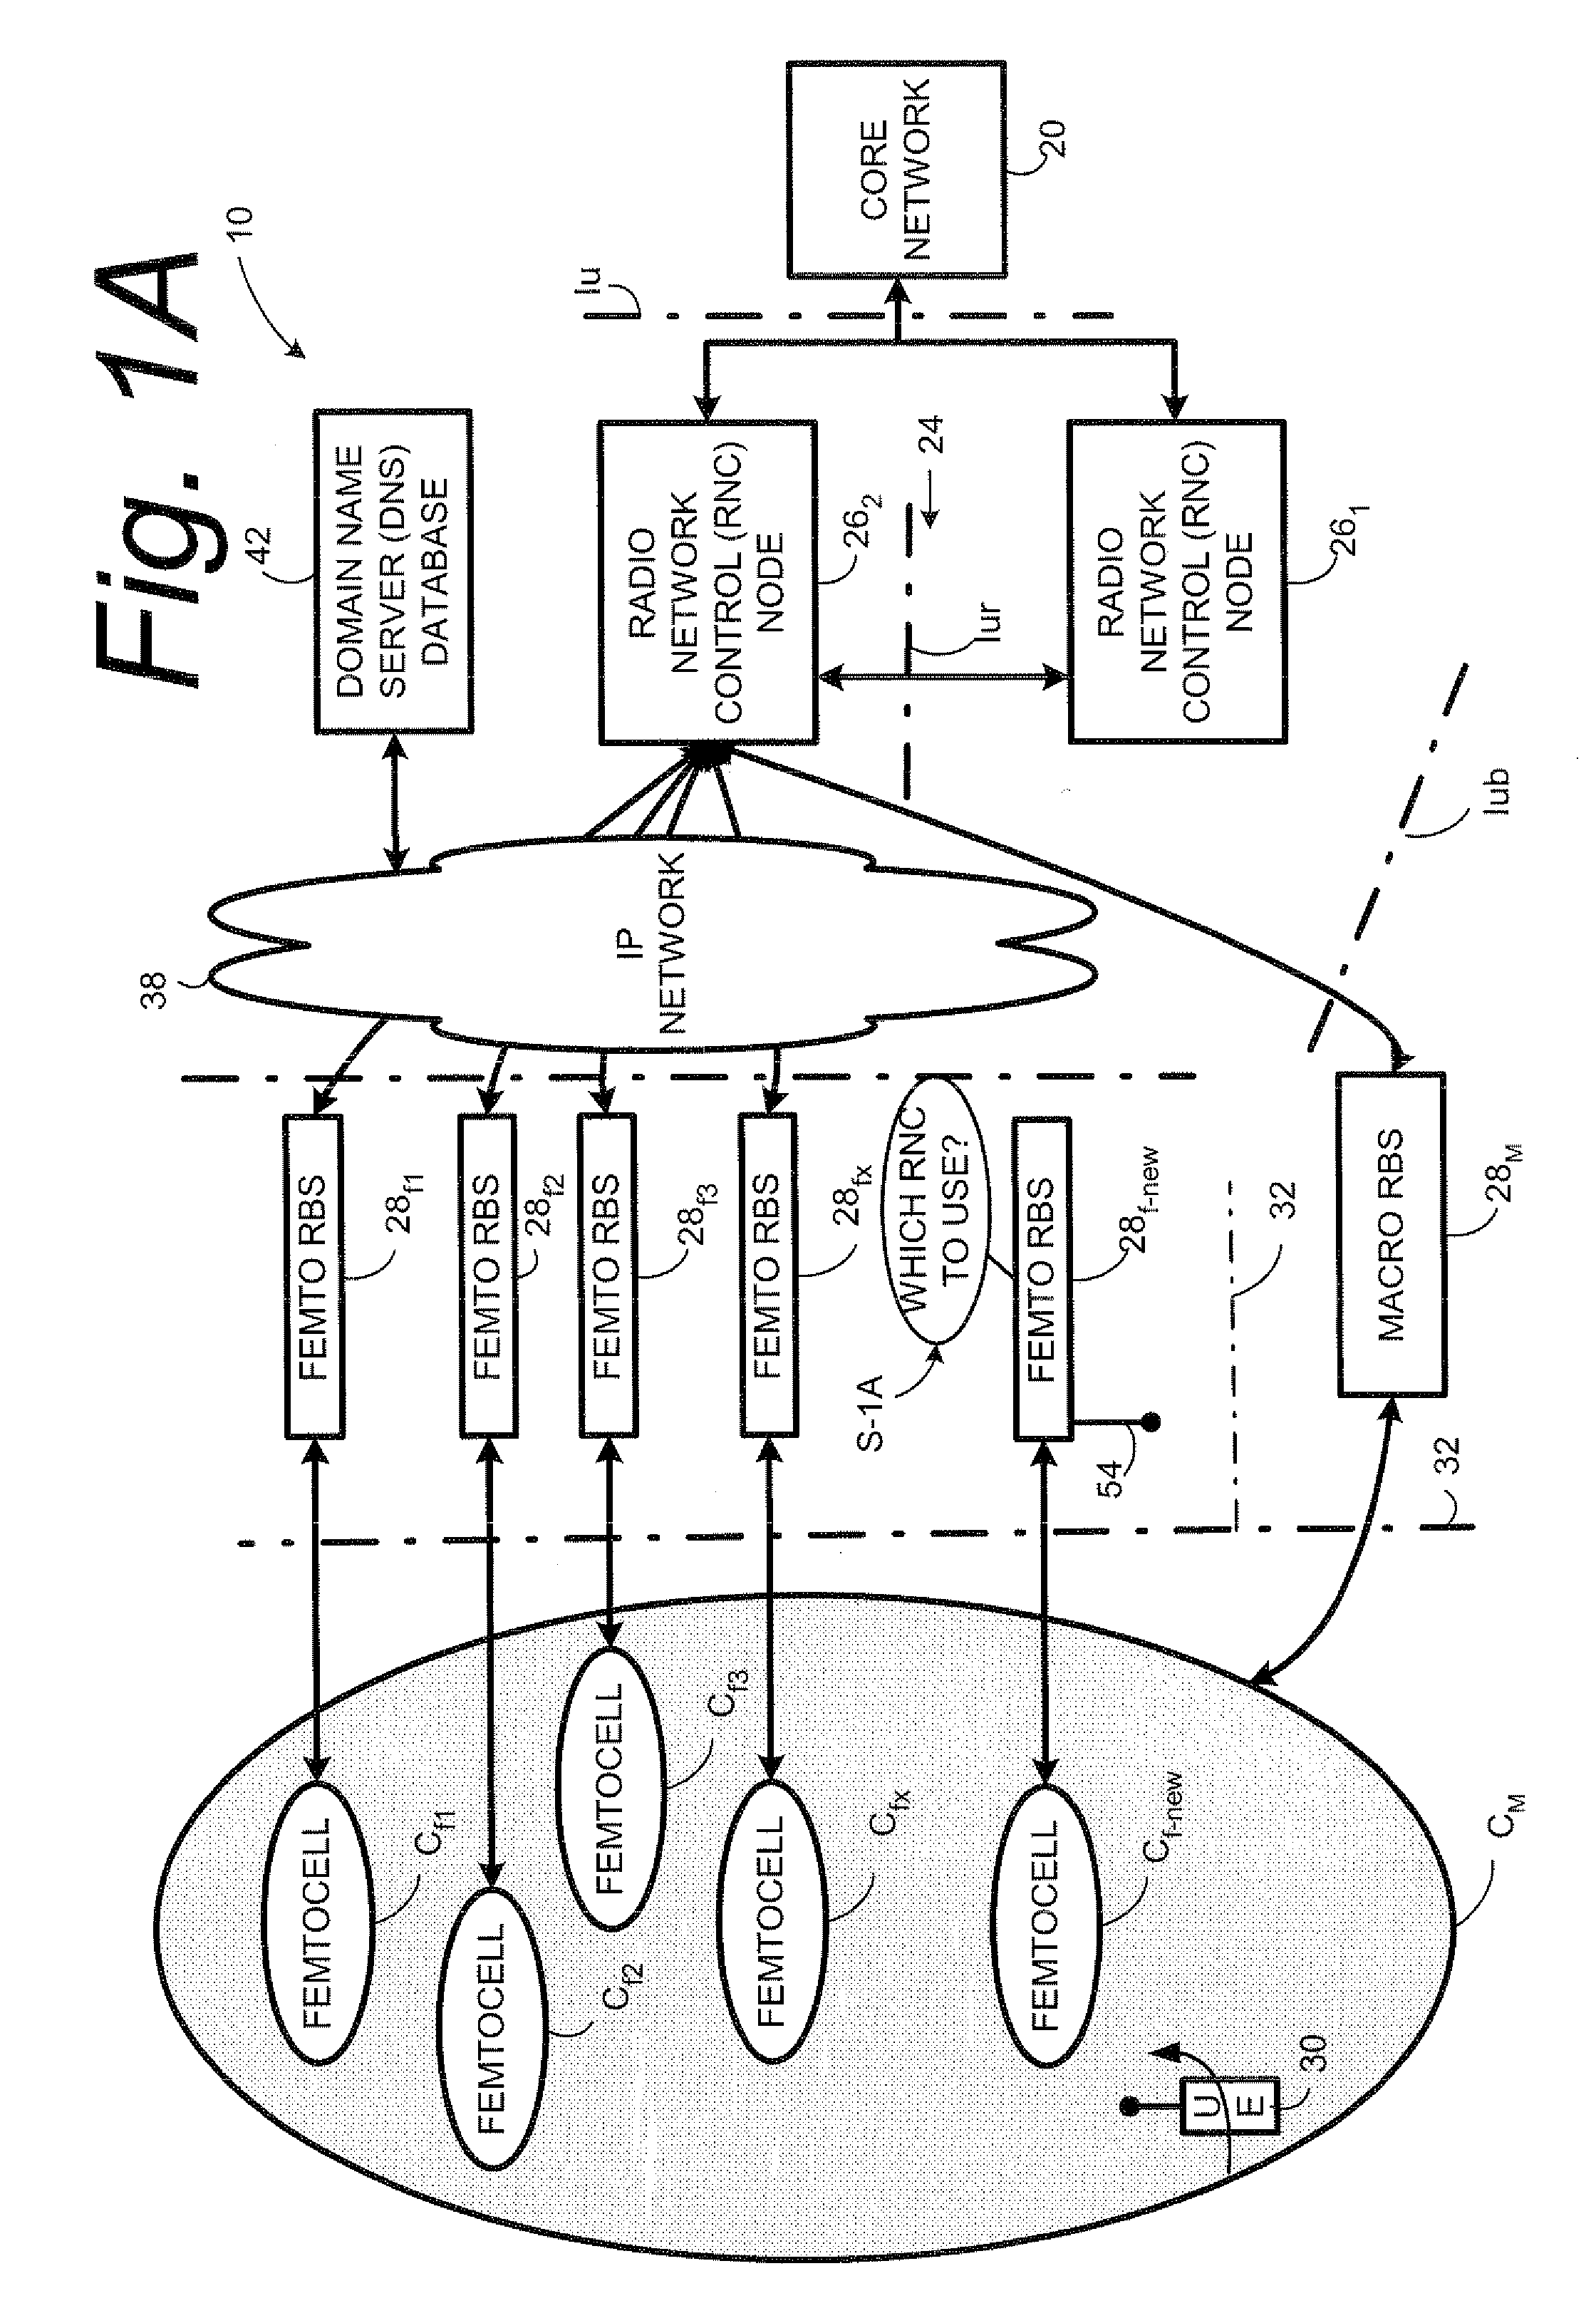 Radio network controller selection for IP-connected radio base station